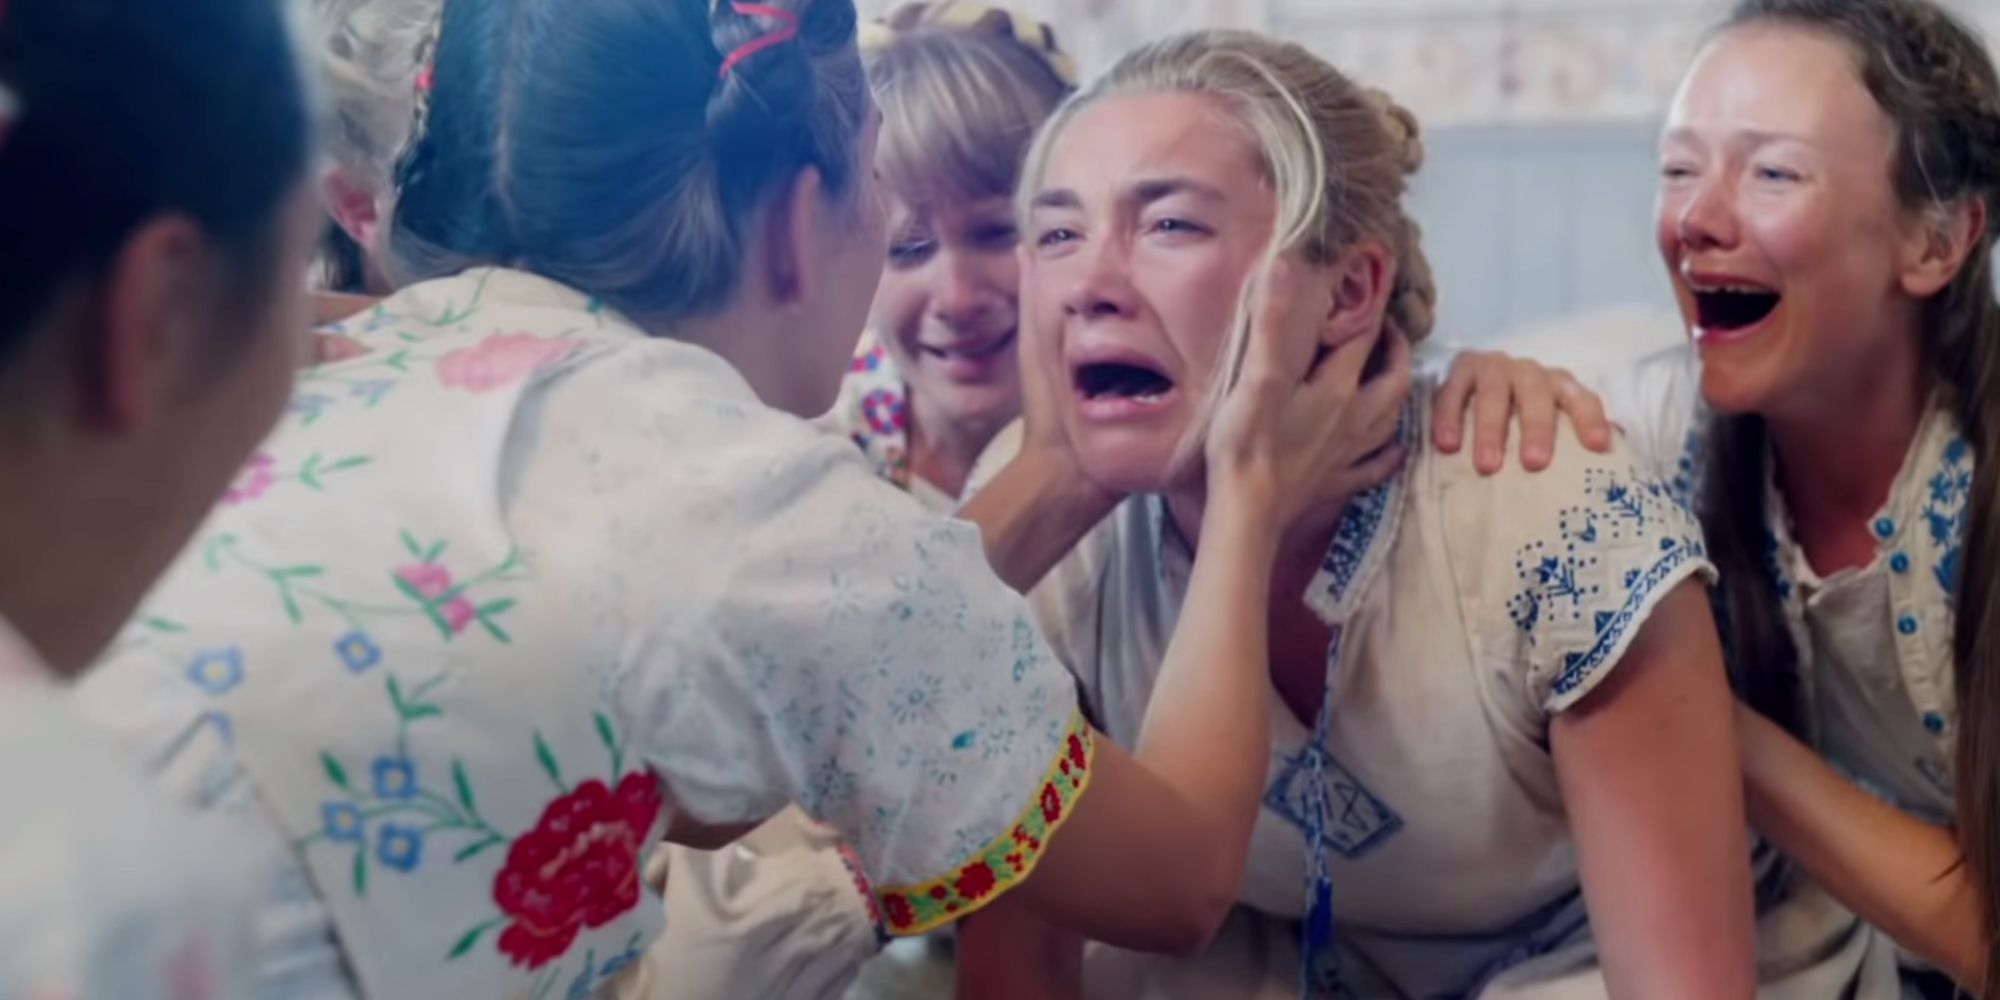 A woman is comforted by a group of women during a panic attack in Midsommar.